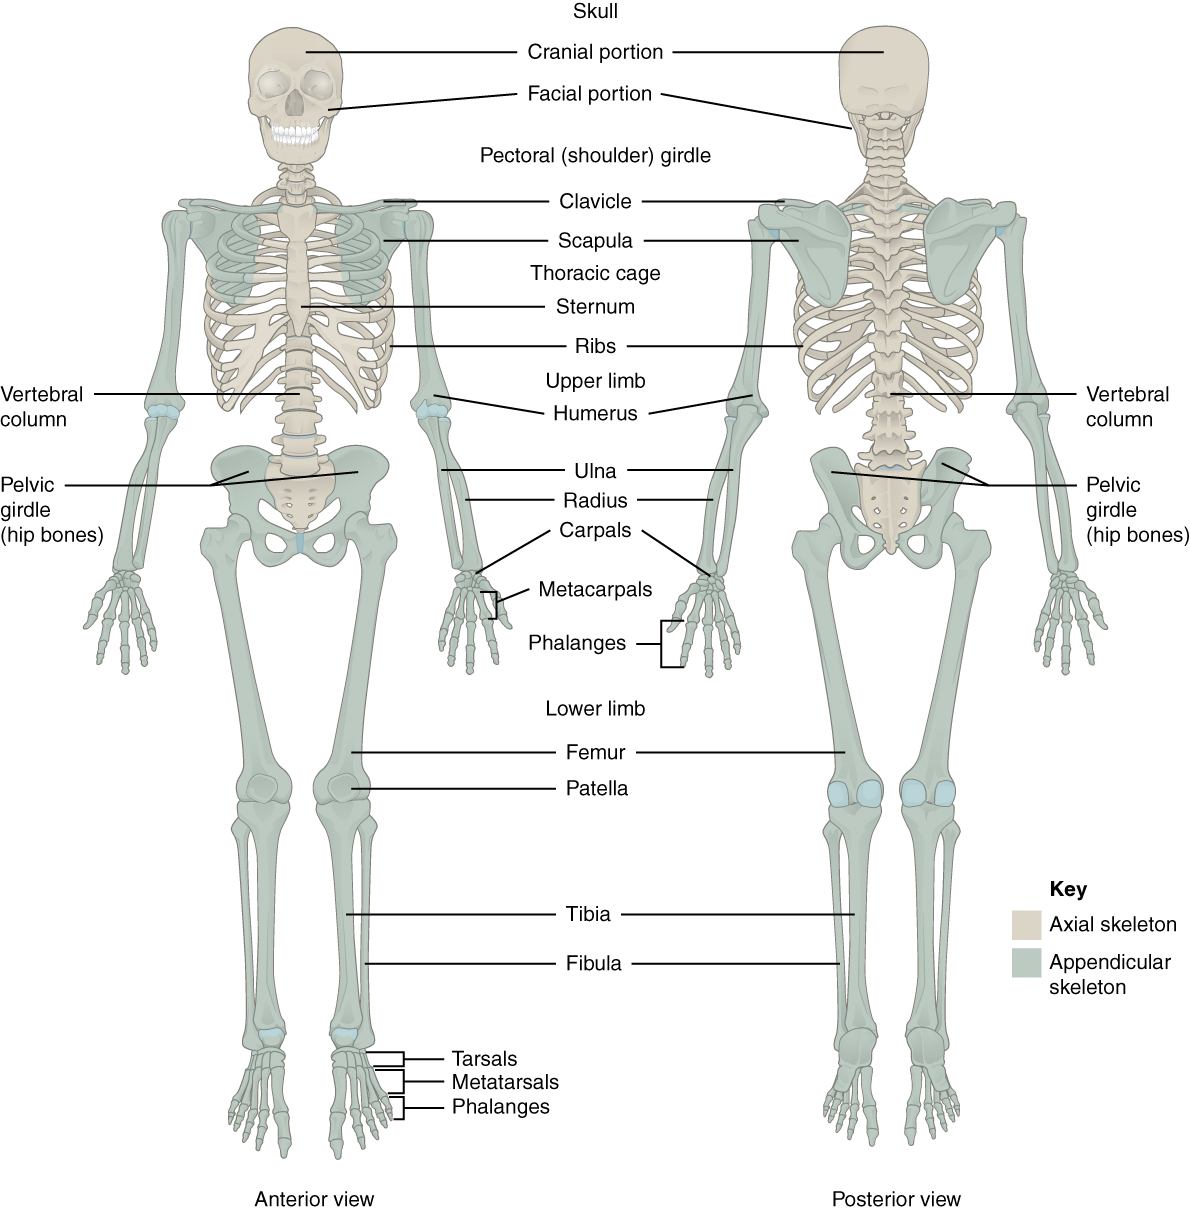 This figure shows the human skeleton. The left panel shows the anterior view, and the right panel shows the posterior view.